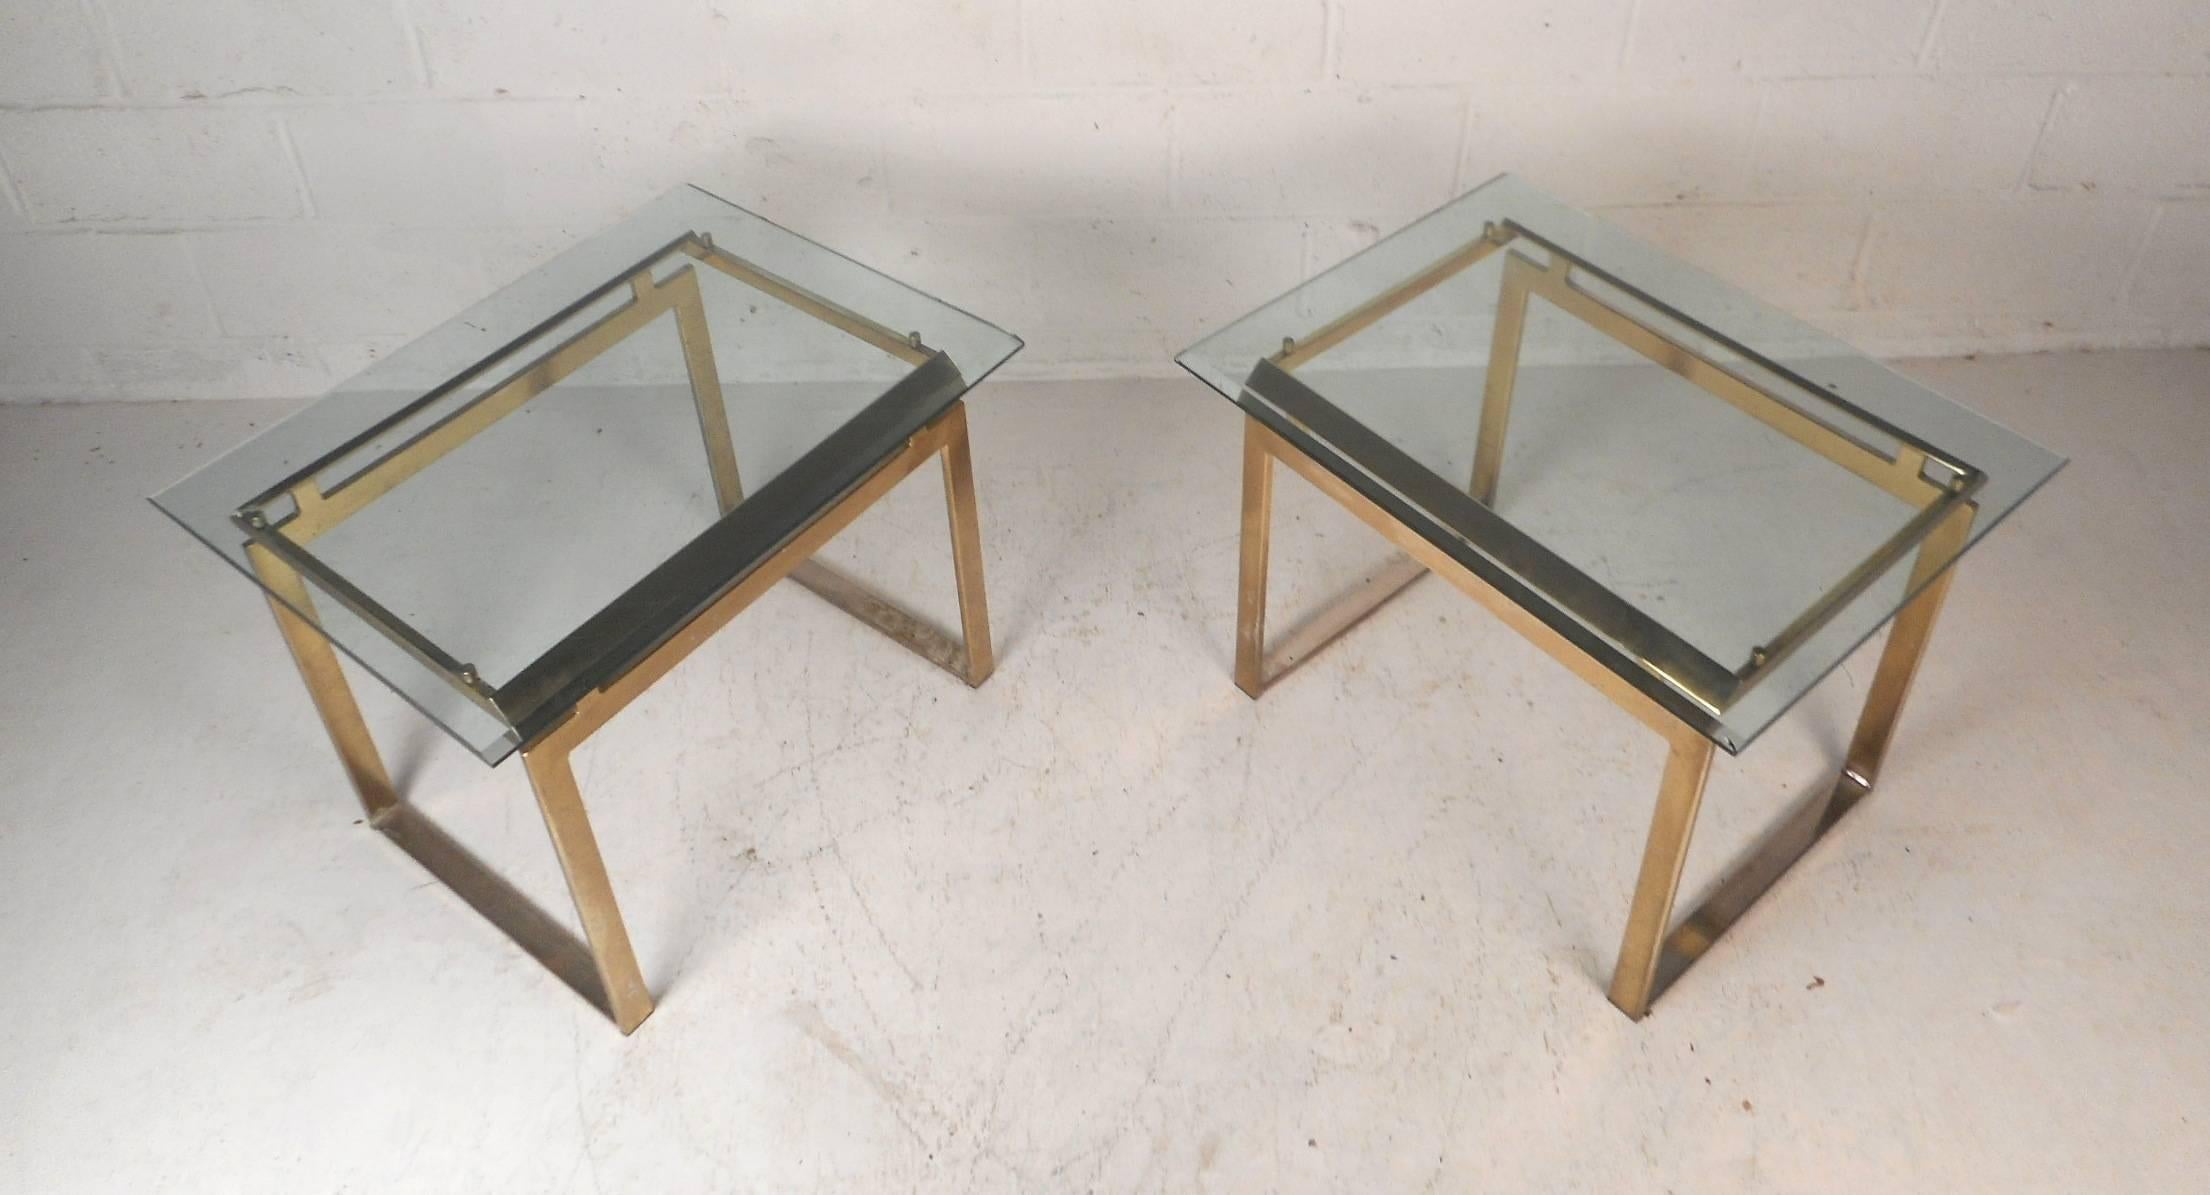 A stunning pair of vintage modern end tables with floating style glass tops with bevelled edges. Heavy metal bases and thick glass tops with a light tint of green adds to the midcentury appeal. A stylish design that looks amazing in any home,